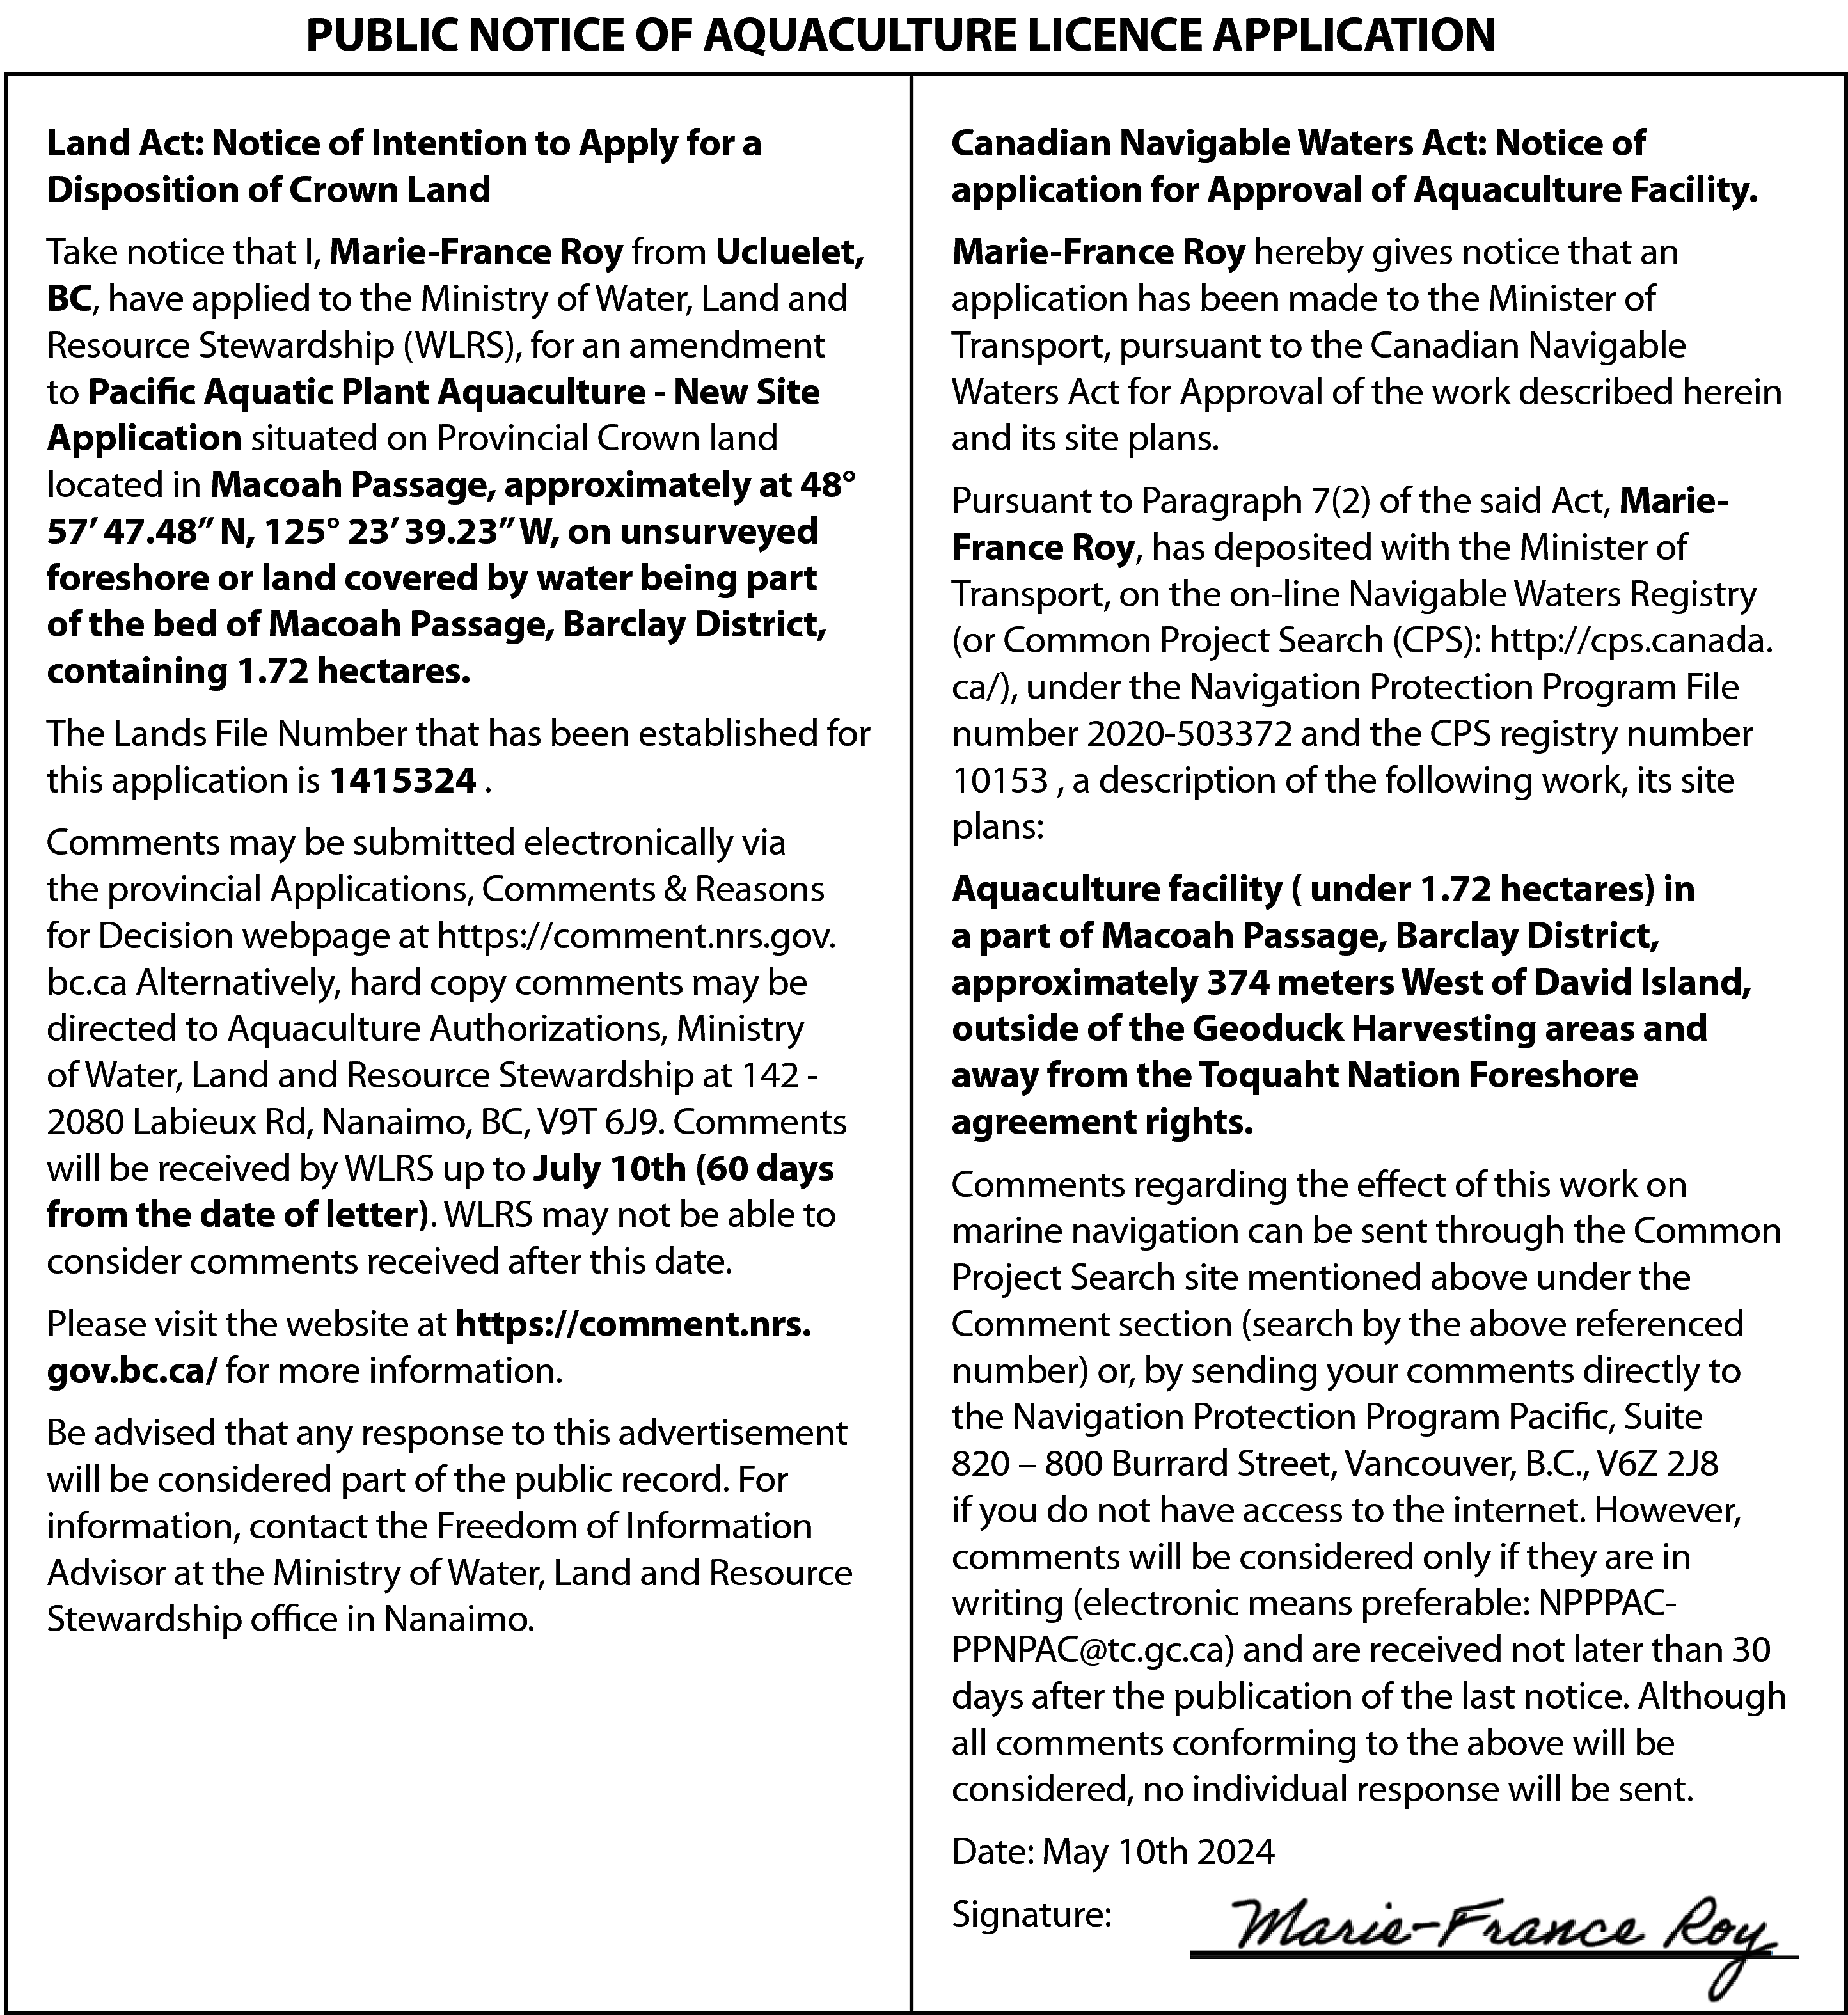 PUBLIC NOTICE OF AQUACULTURE LICENCE  PUBLIC NOTICE OF AQUACULTURE LICENCE APPLICATION  Land Act: Notice of Intention to Apply for a  Disposition of Crown Land    Canadian Navigable Waters Act: Notice of  application for Approval of Aquaculture Facility.    Take notice that I, Marie-France Roy from Ucluelet,  BC, have applied to the Ministry of Water, Land and  Resource Stewardship (WLRS), for an amendment  to Pacific Aquatic Plant Aquaculture - New Site  Application situated on Provincial Crown land  located in Macoah Passage, approximately at 48°  57’ 47.48” N, 125° 23’ 39.23” W, on unsurveyed  foreshore or land covered by water being part  of the bed of Macoah Passage, Barclay District,  containing 1.72 hectares.    Marie-France Roy hereby gives notice that an  application has been made to the Minister of  Transport, pursuant to the Canadian Navigable  Waters Act for Approval of the work described herein  and its site plans.    The Lands File Number that has been established for  this application is 1415324 .  Comments may be submitted electronically via  the provincial Applications, Comments & Reasons  for Decision webpage at https://comment.nrs.gov.  bc.ca Alternatively, hard copy comments may be  directed to Aquaculture Authorizations, Ministry  of Water, Land and Resource Stewardship at 142 2080 Labieux Rd, Nanaimo, BC, V9T 6J9. Comments  will be received by WLRS up to July 10th (60 days  from the date of letter). WLRS may not be able to  consider comments received after this date.  Please visit the website at https://comment.nrs.  gov.bc.ca/ for more information.  Be advised that any response to this advertisement  will be considered part of the public record. For  information, contact the Freedom of Information  Advisor at the Ministry of Water, Land and Resource  Stewardship office in Nanaimo.    Pursuant to Paragraph 7(2) of the said Act, MarieFrance Roy, has deposited with the Minister of  Transport, on the on-line Navigable Waters Registry  (or Common Project Search (CPS): http://cps.canada.  ca/), under the Navigation Protection Program File  number 2020-503372 and the CPS registry number  10153 , a description of the following work, its site  plans:  Aquaculture facility ( under 1.72 hectares) in  a part of Macoah Passage, Barclay District,  approximately 374 meters West of David Island,  outside of the Geoduck Harvesting areas and  away from the Toquaht Nation Foreshore  agreement rights.  Comments regarding the effect of this work on  marine navigation can be sent through the Common  Project Search site mentioned above under the  Comment section (search by the above referenced  number) or, by sending your comments directly to  the Navigation Protection Program Pacific, Suite  820 – 800 Burrard Street, Vancouver, B.C., V6Z 2J8  if you do not have access to the internet. However,  comments will be considered only if they are in  writing (electronic means preferable: NPPPACPPNPAC@tc.gc.ca) and are received not later than 30  days after the publication of the last notice. Although  all comments conforming to the above will be  considered, no individual response will be sent.  Date: May 10th 2024  Signature:    